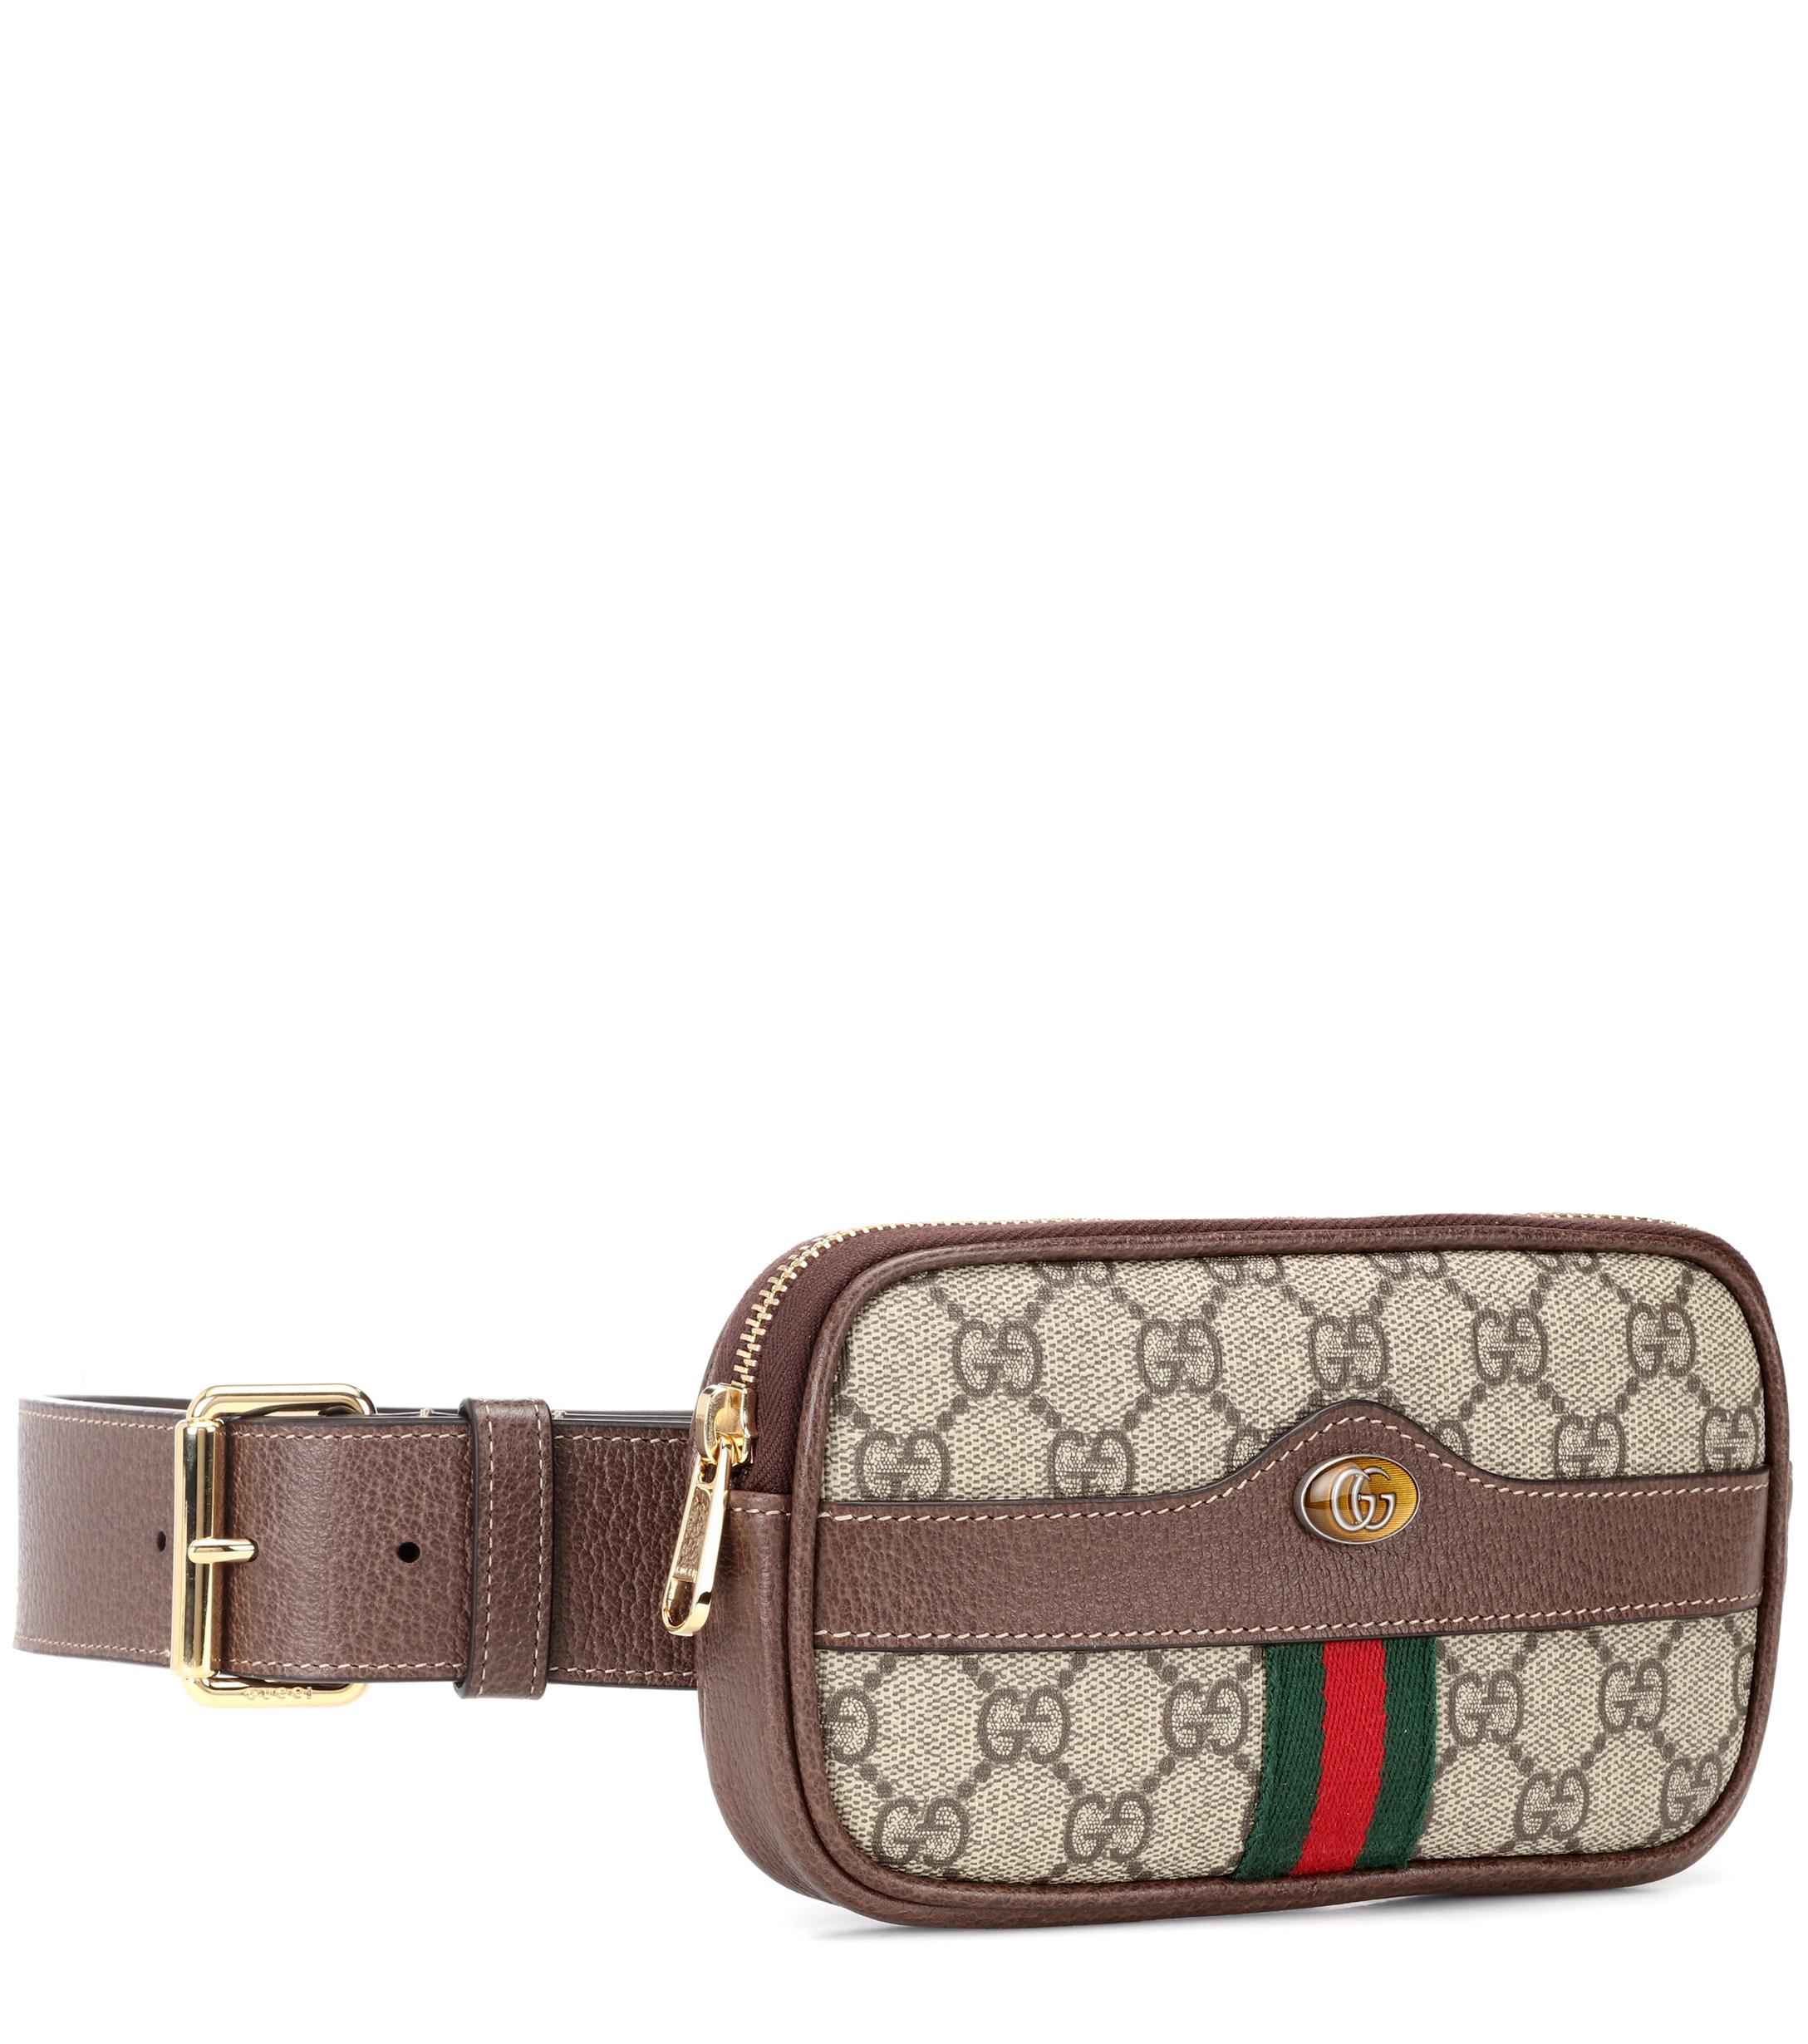 Gucci Leather Ophidia GG Supreme Belt Bag in Brown - Lyst